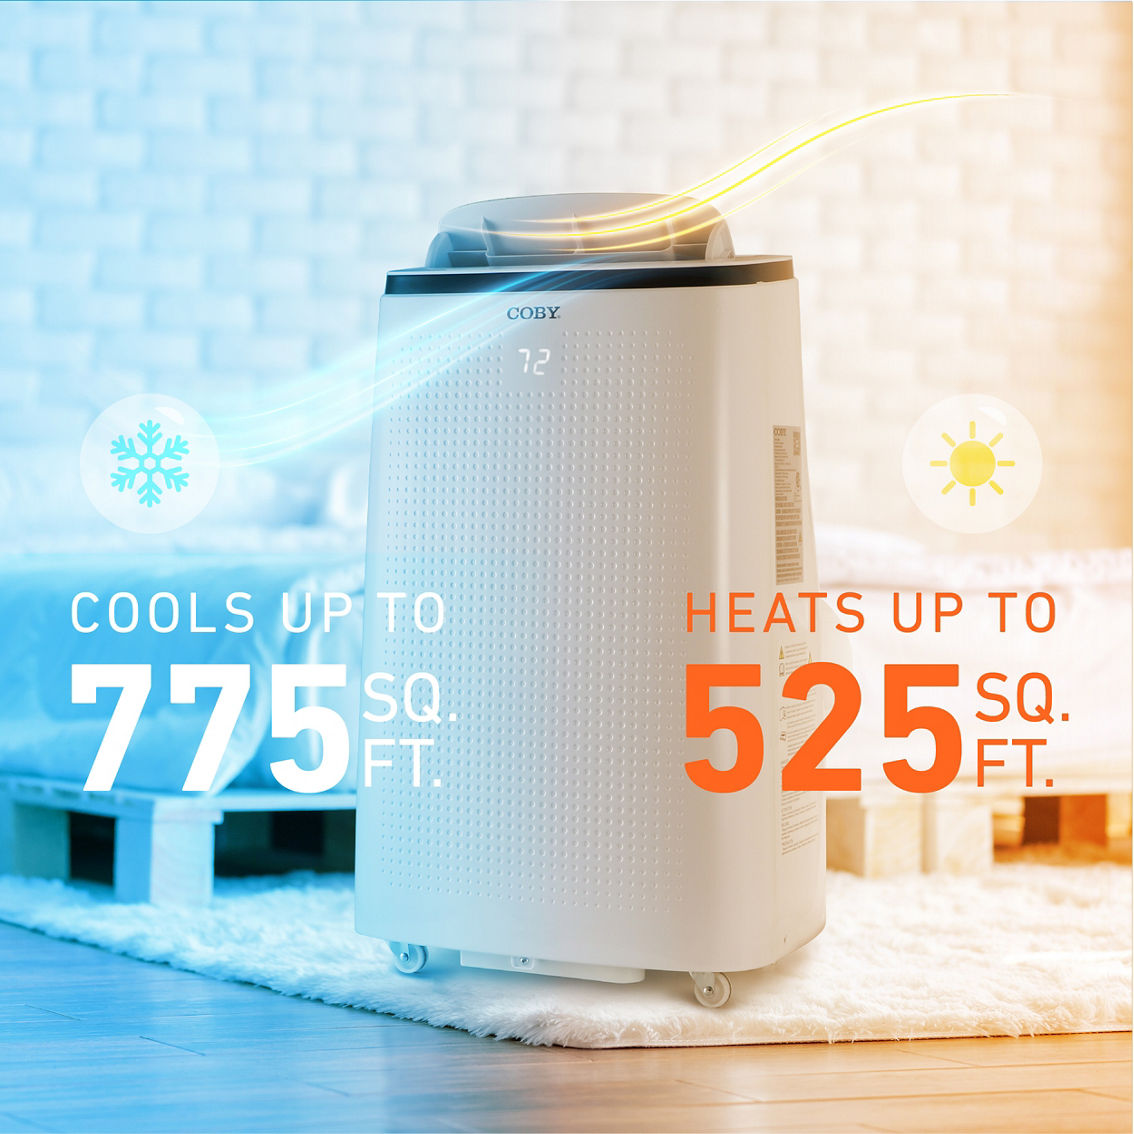 Coby Portable Air Conditioner 4-in-1 Heater, Dehumidifier, Fan, Air Conditioner - Image 2 of 3